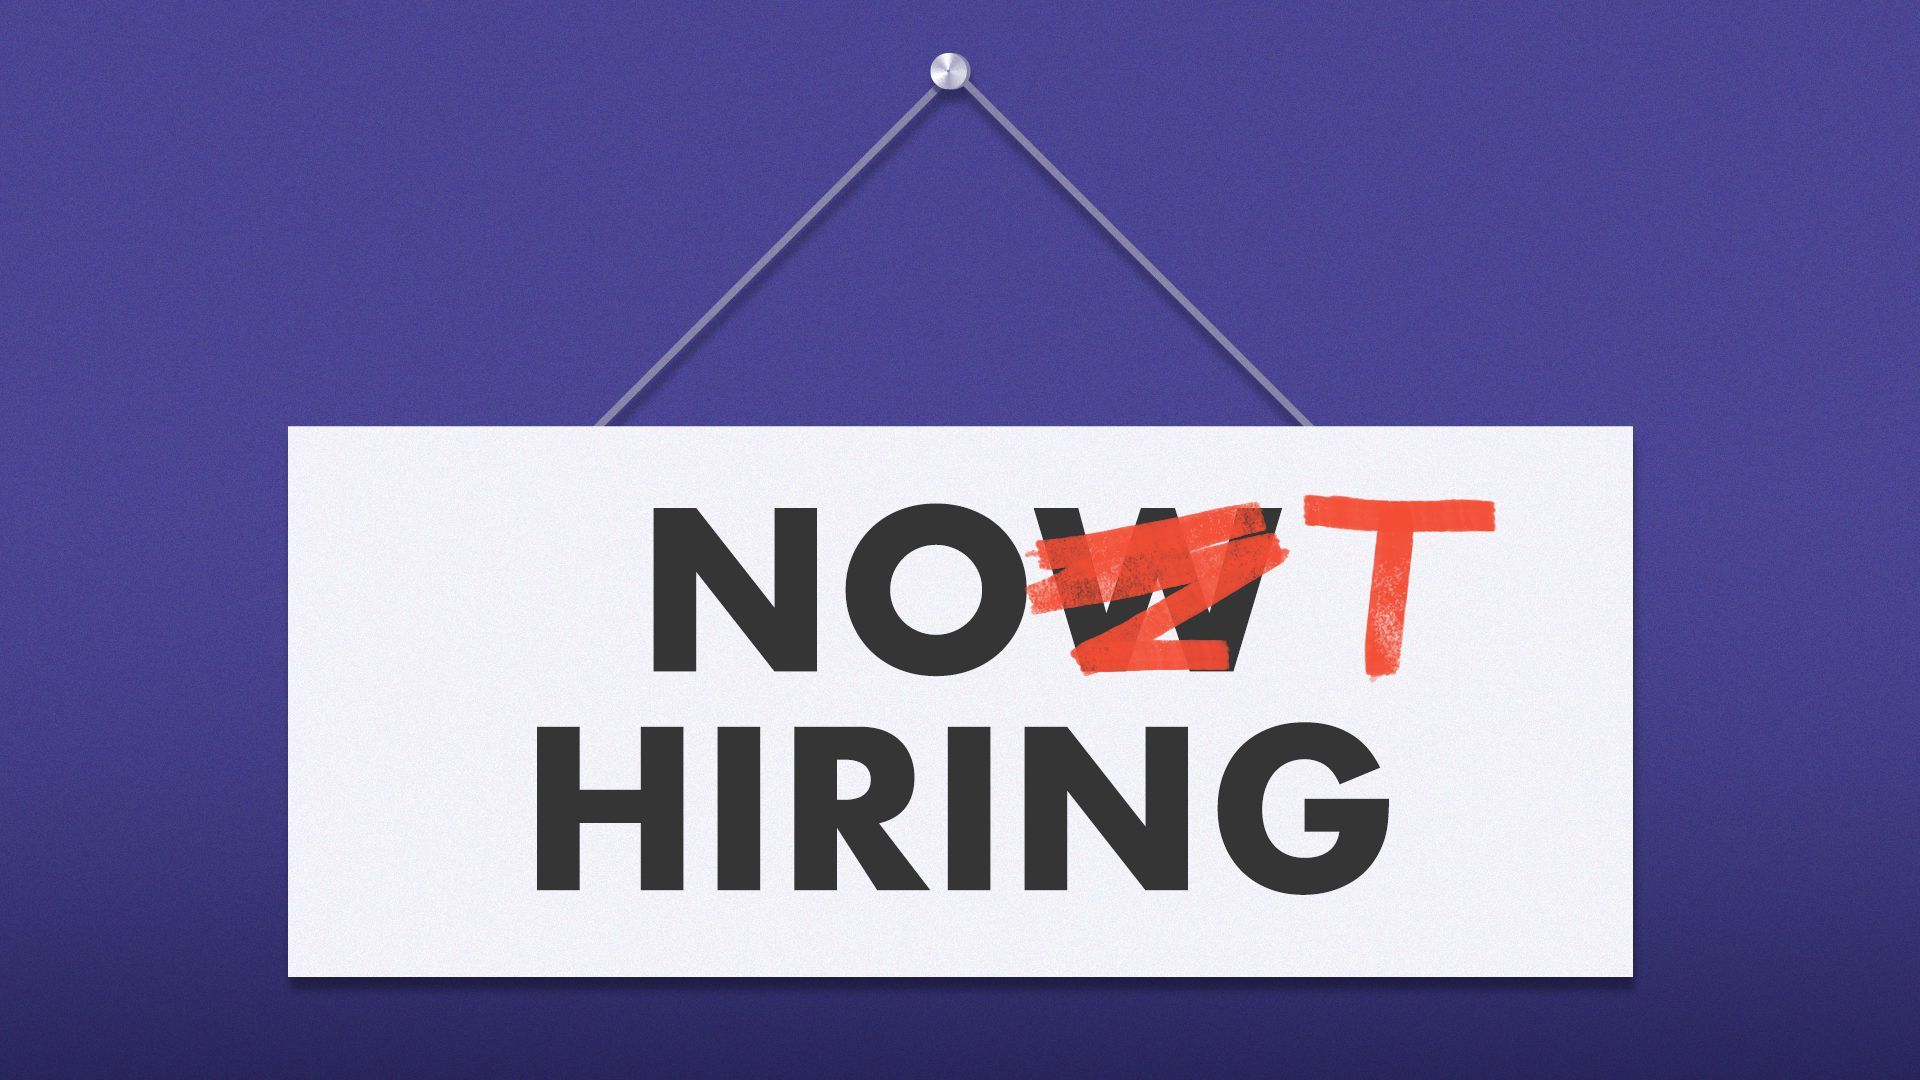 Illustration of a sign saying "Now Hiring" with the "w" crossed out and replaced with a "t."